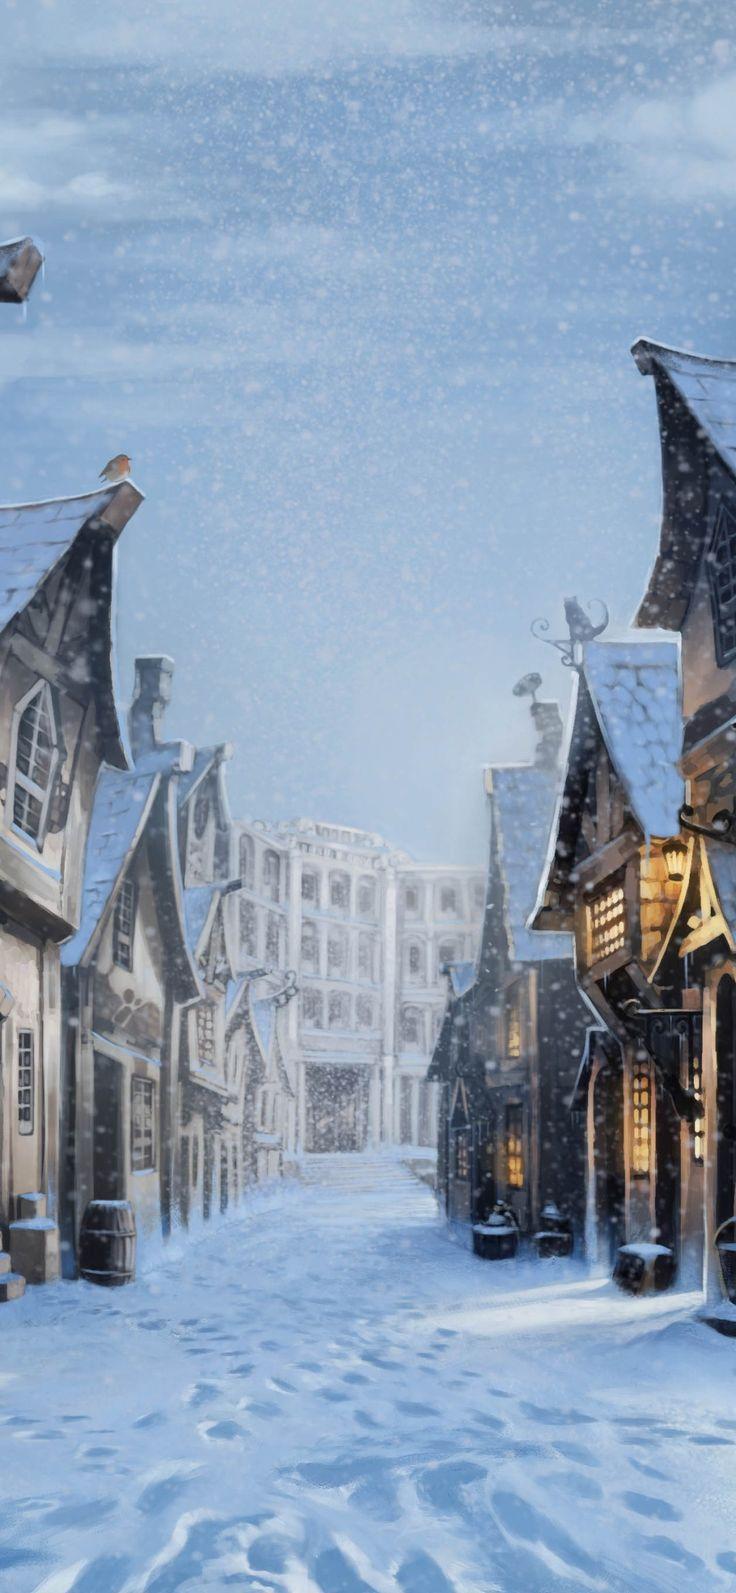 Diagon Alley Harry Potter iPhone Wallpaper